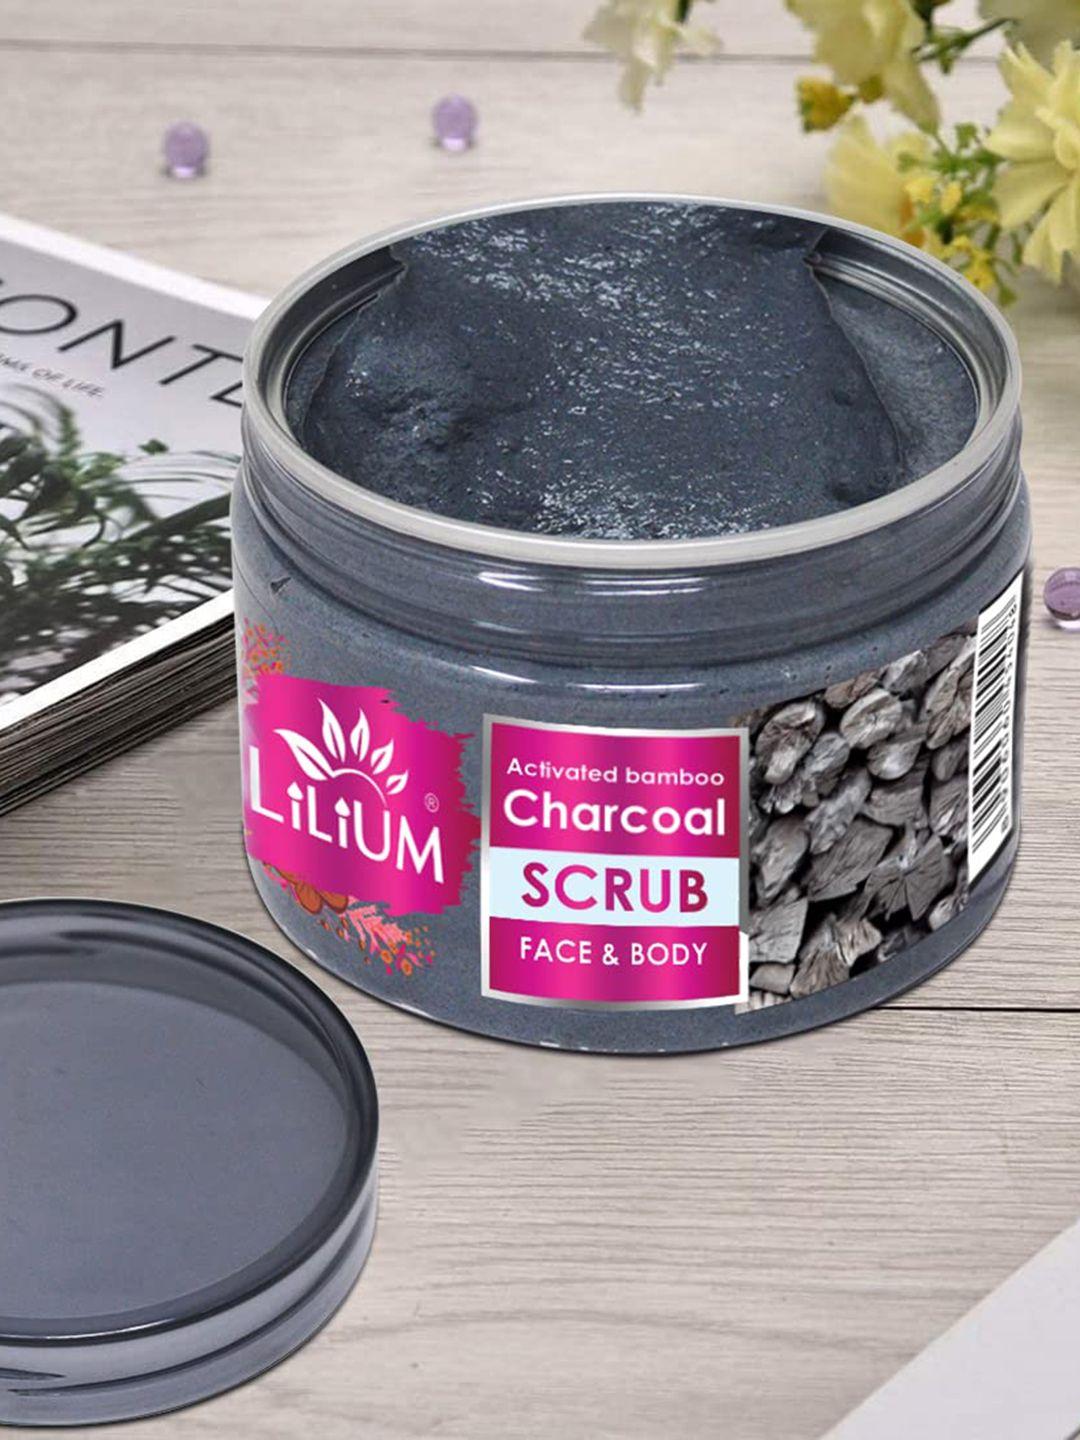 lilium activated bamboo charcoal face & body scrub with sweet almond oil - 250 g